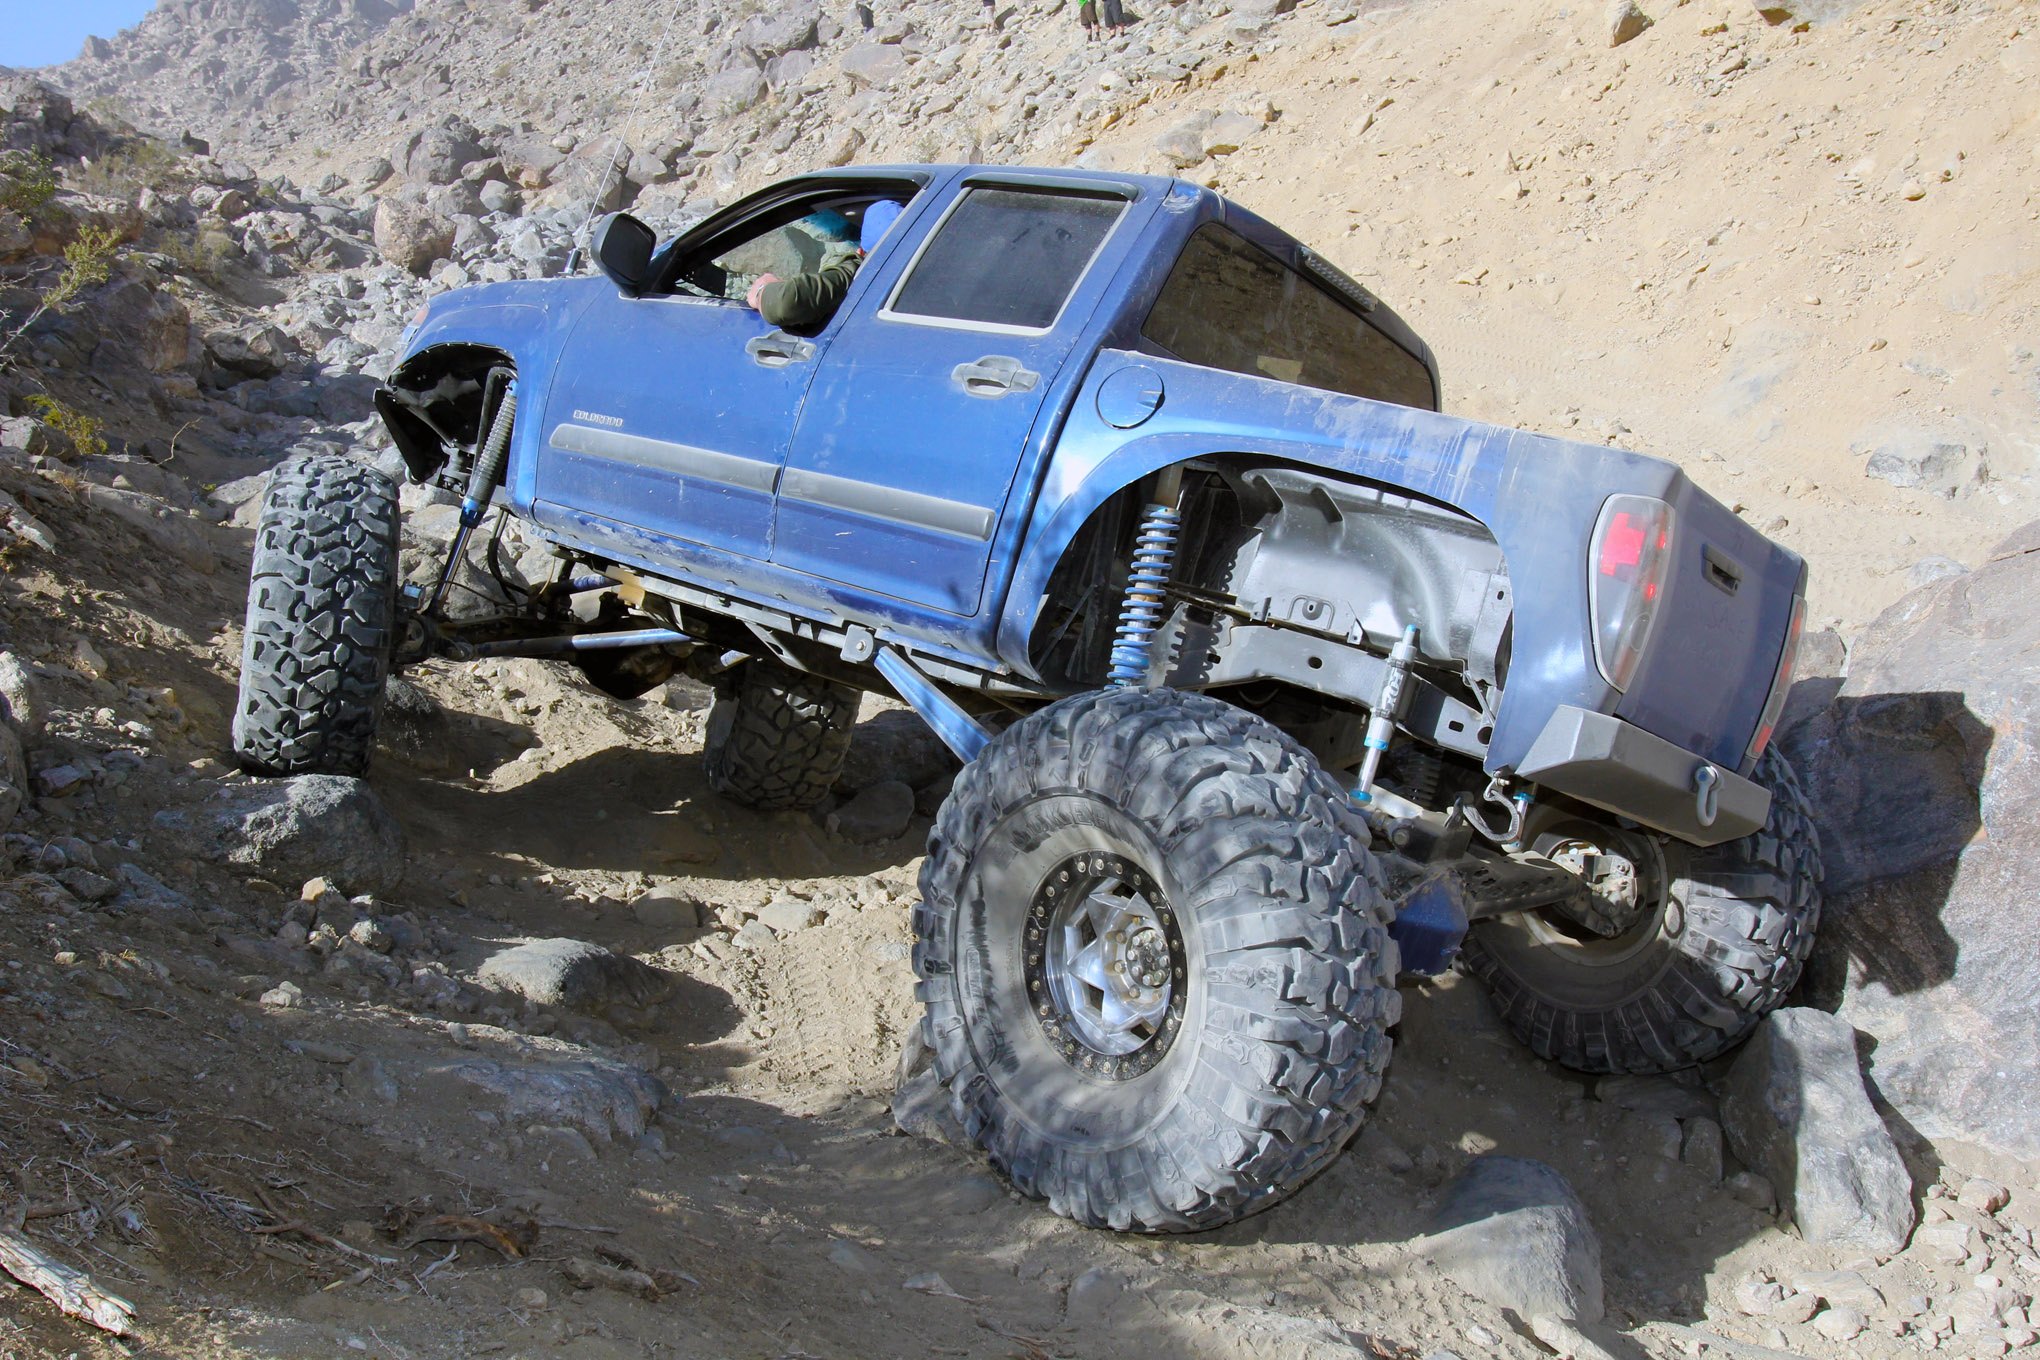 Fox Suspension Kit on Blue Lifted Chevy Colorado - Photo by fourwheeler.com